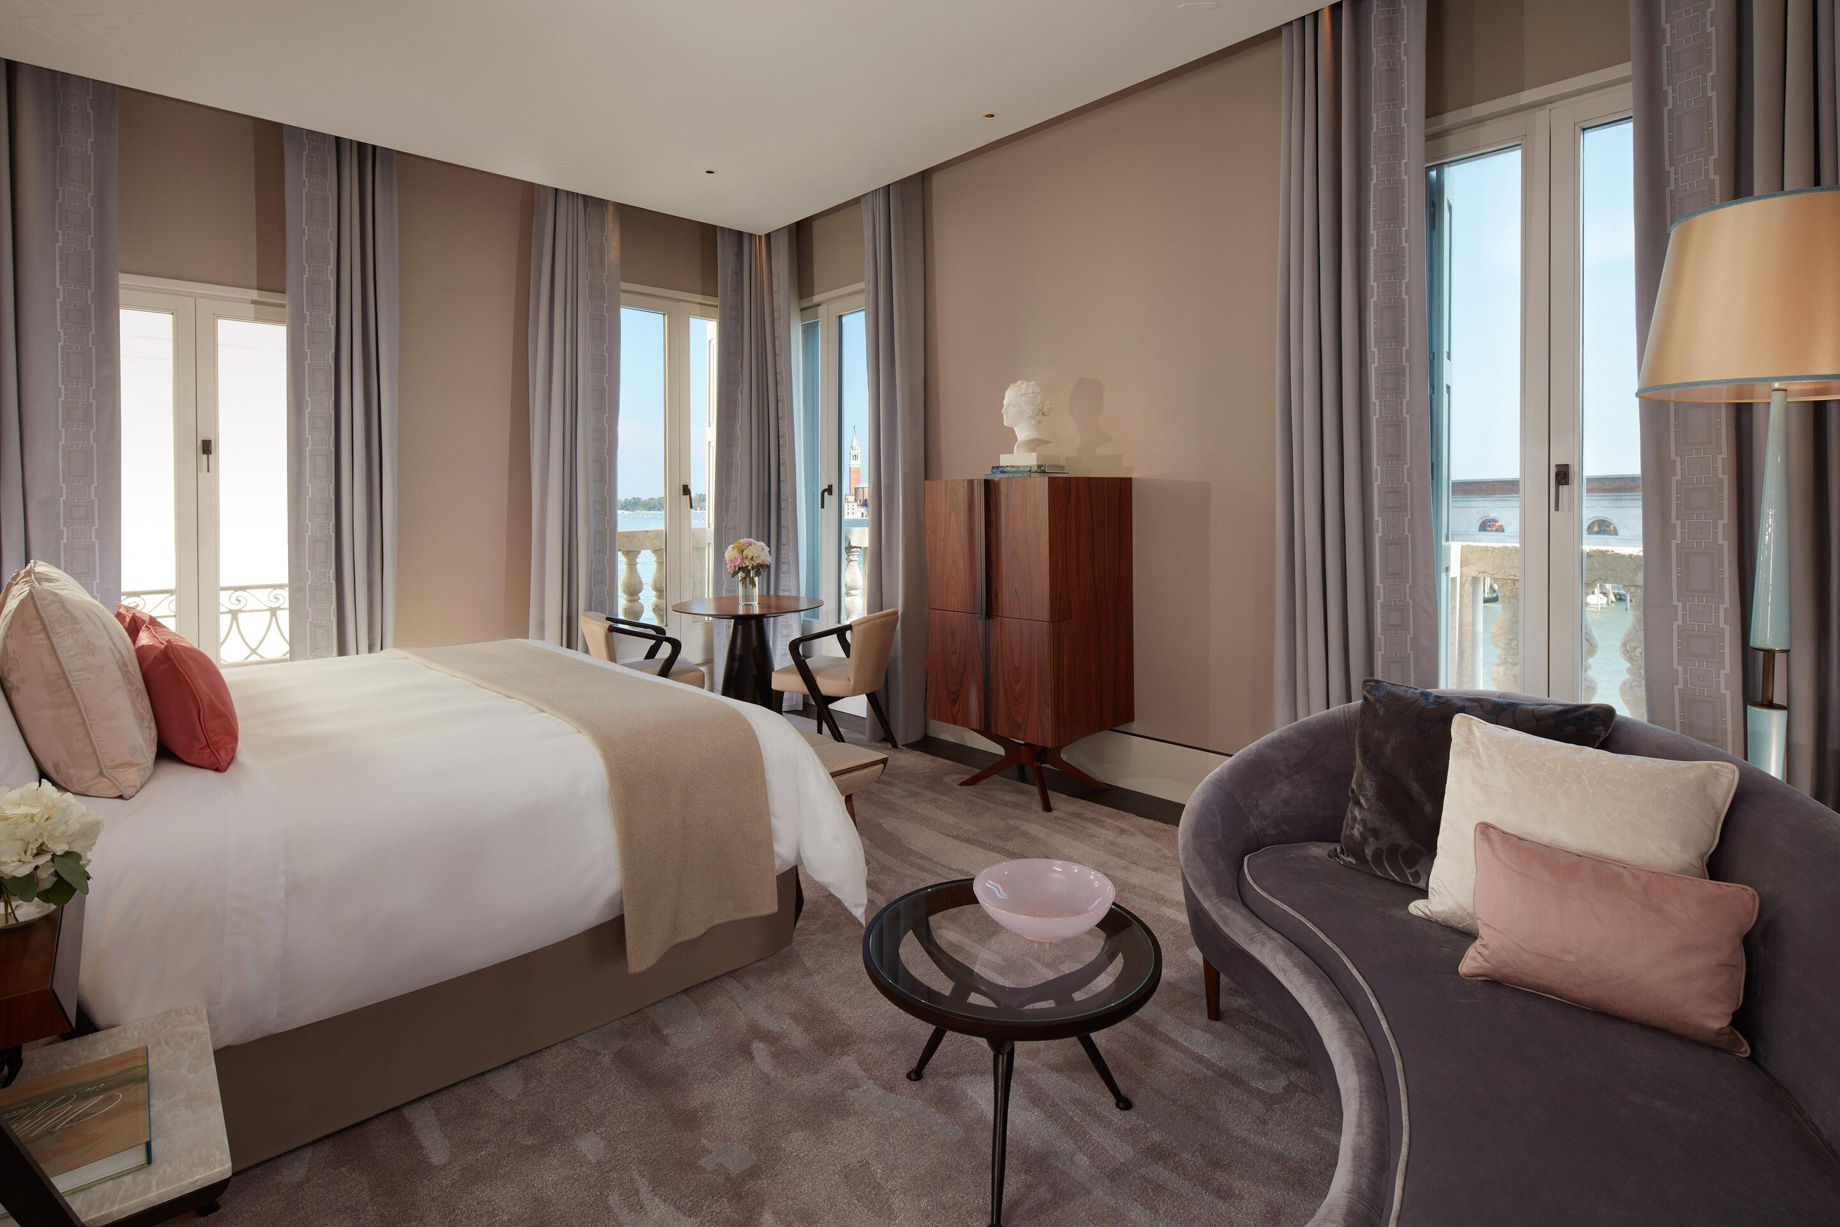 The St. Regis Venice Hotel - Venice, Italy - Luxury Grand Canal View Room